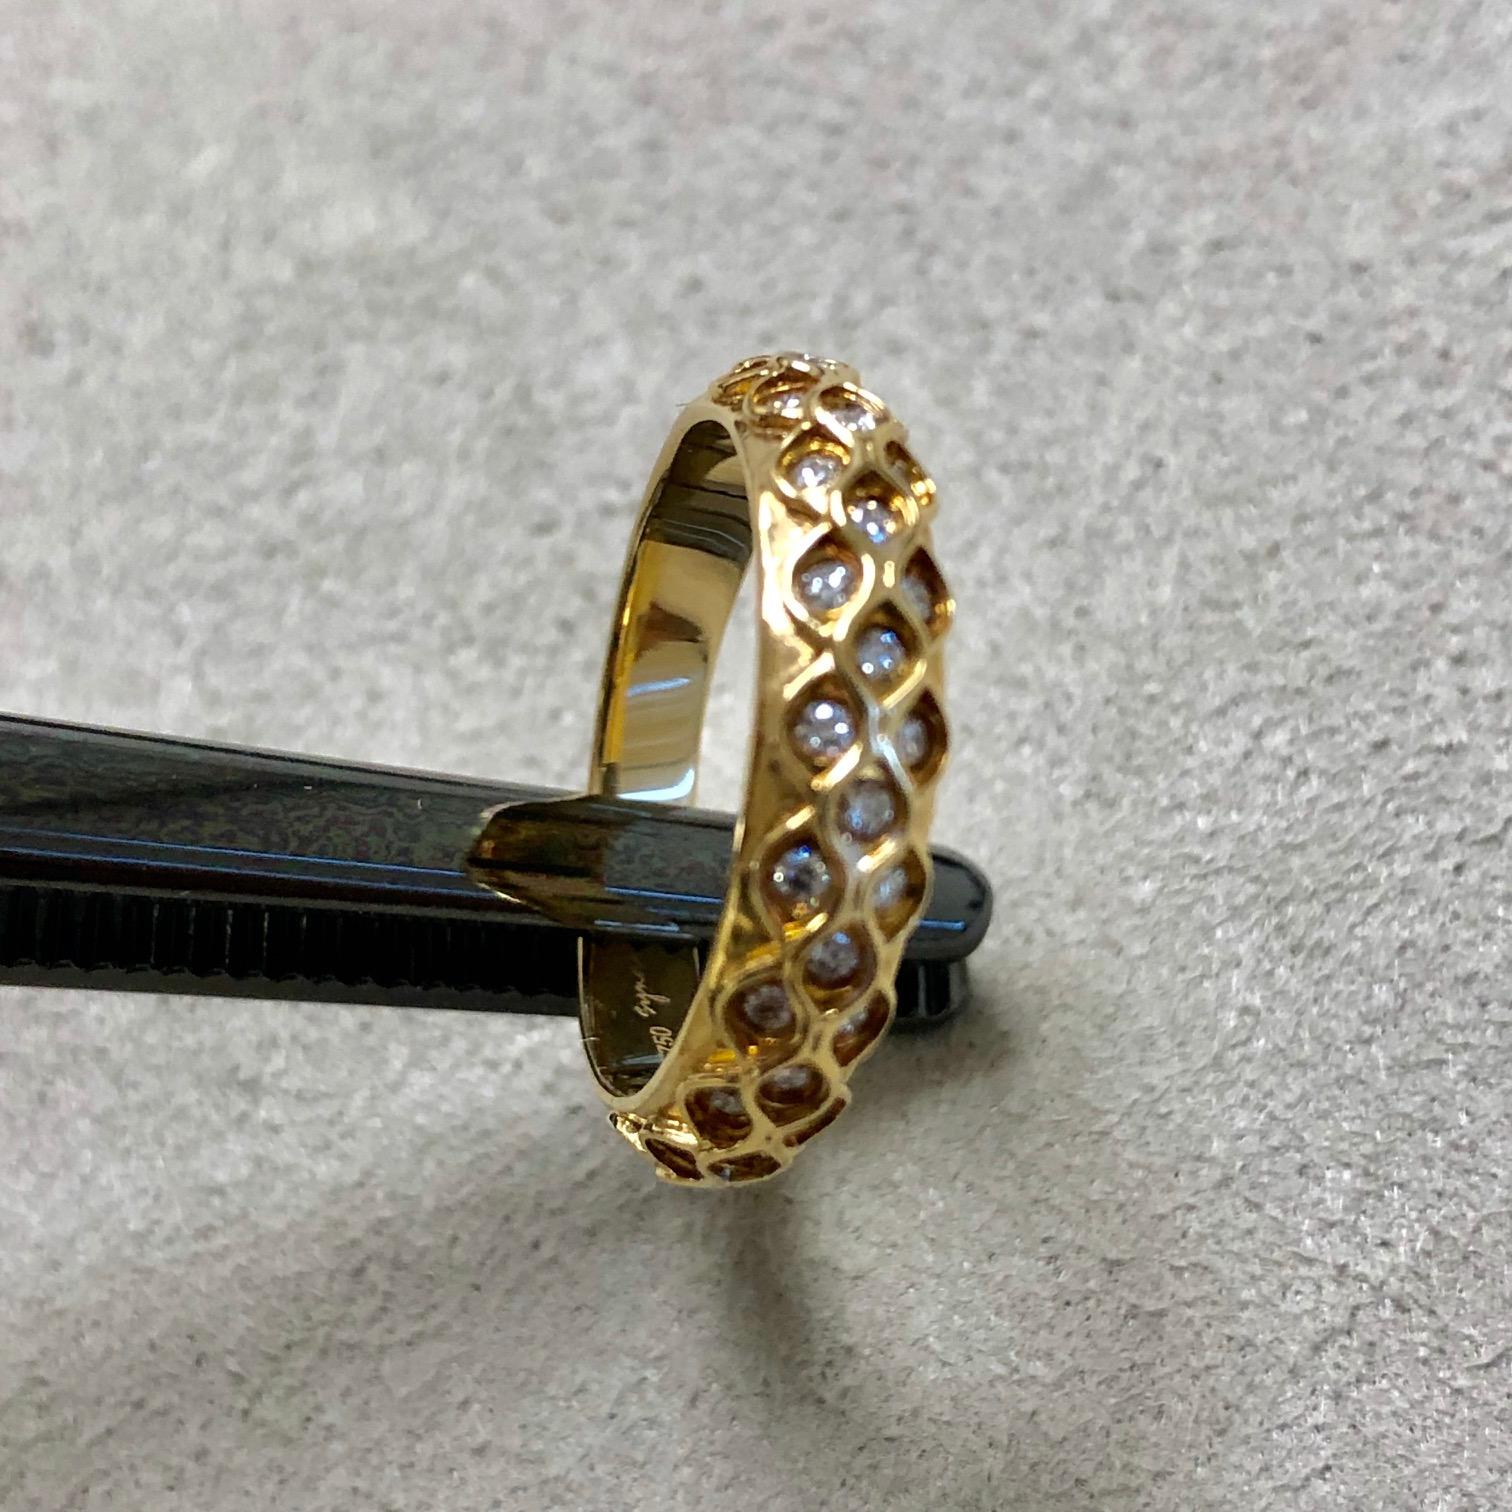 Created in 18 karat yellow gold
Diamonds 0.30 ct approx
Ring size US 6.5, can be sized up or down
Limited edition

Crafted from 18 karat yellow gold, this limited-edition ring showcases a captivating 0.30 ct of diamonds. It can be sized up or down